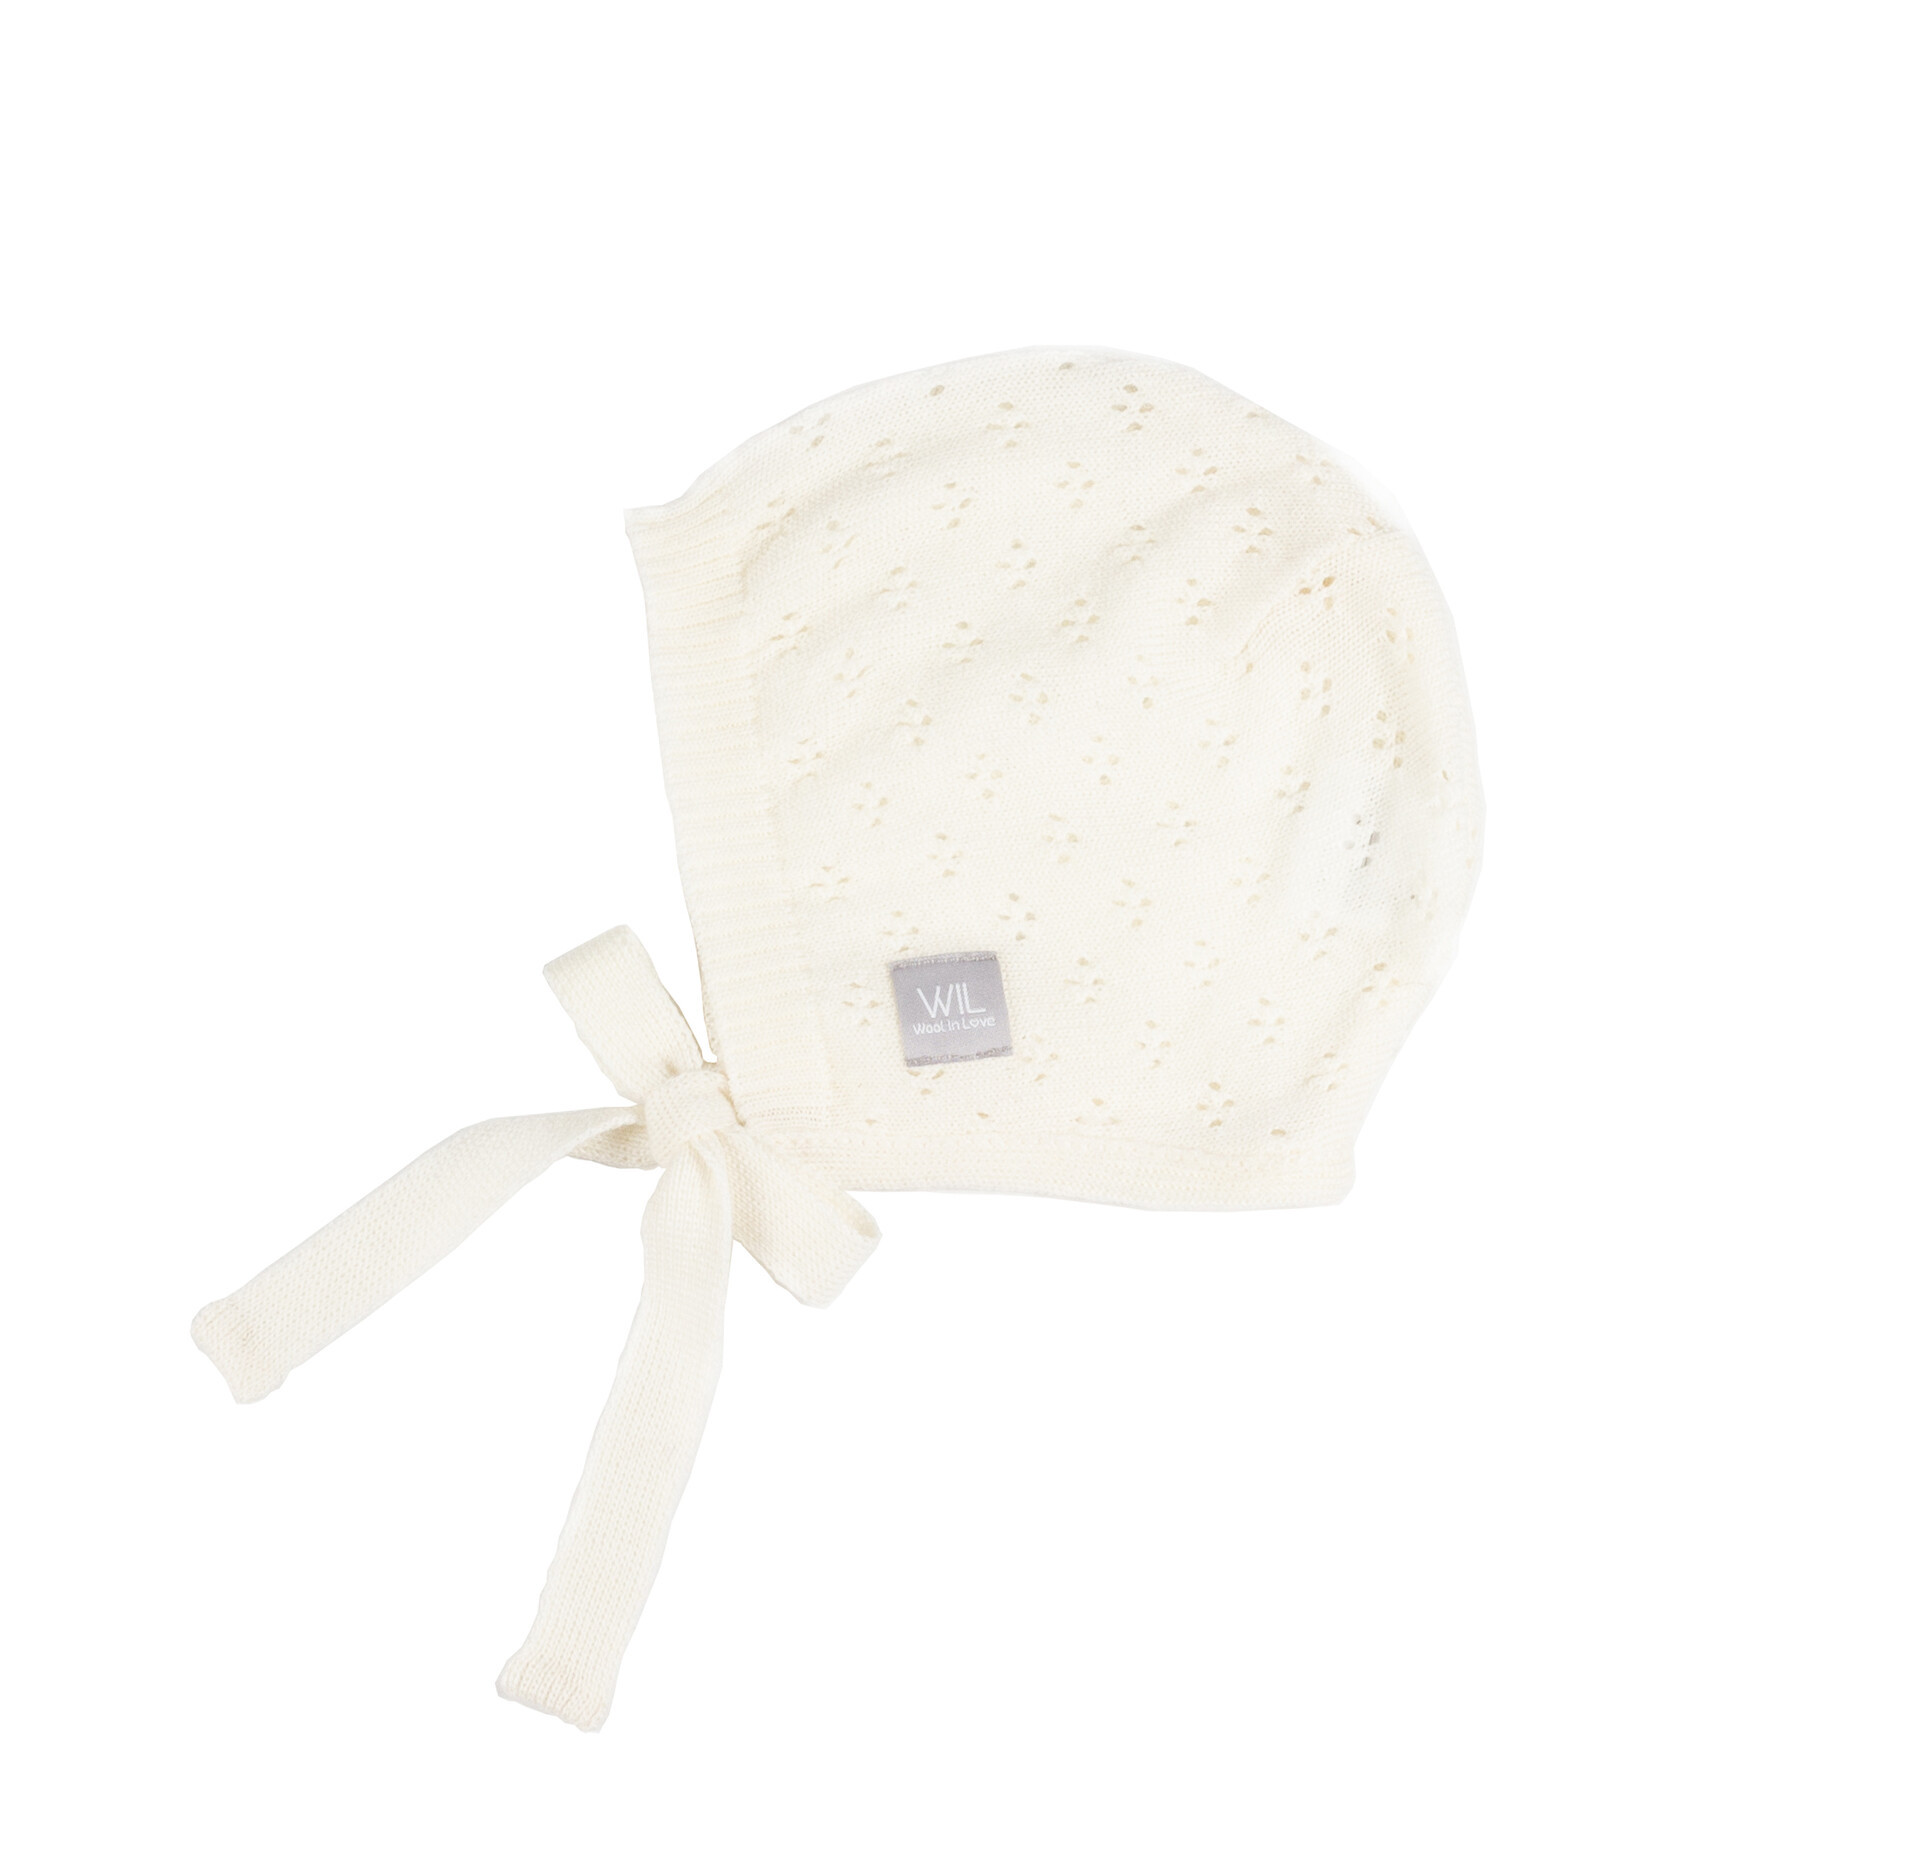 Lovely classical flowery pattern bonne hat for your newborn.